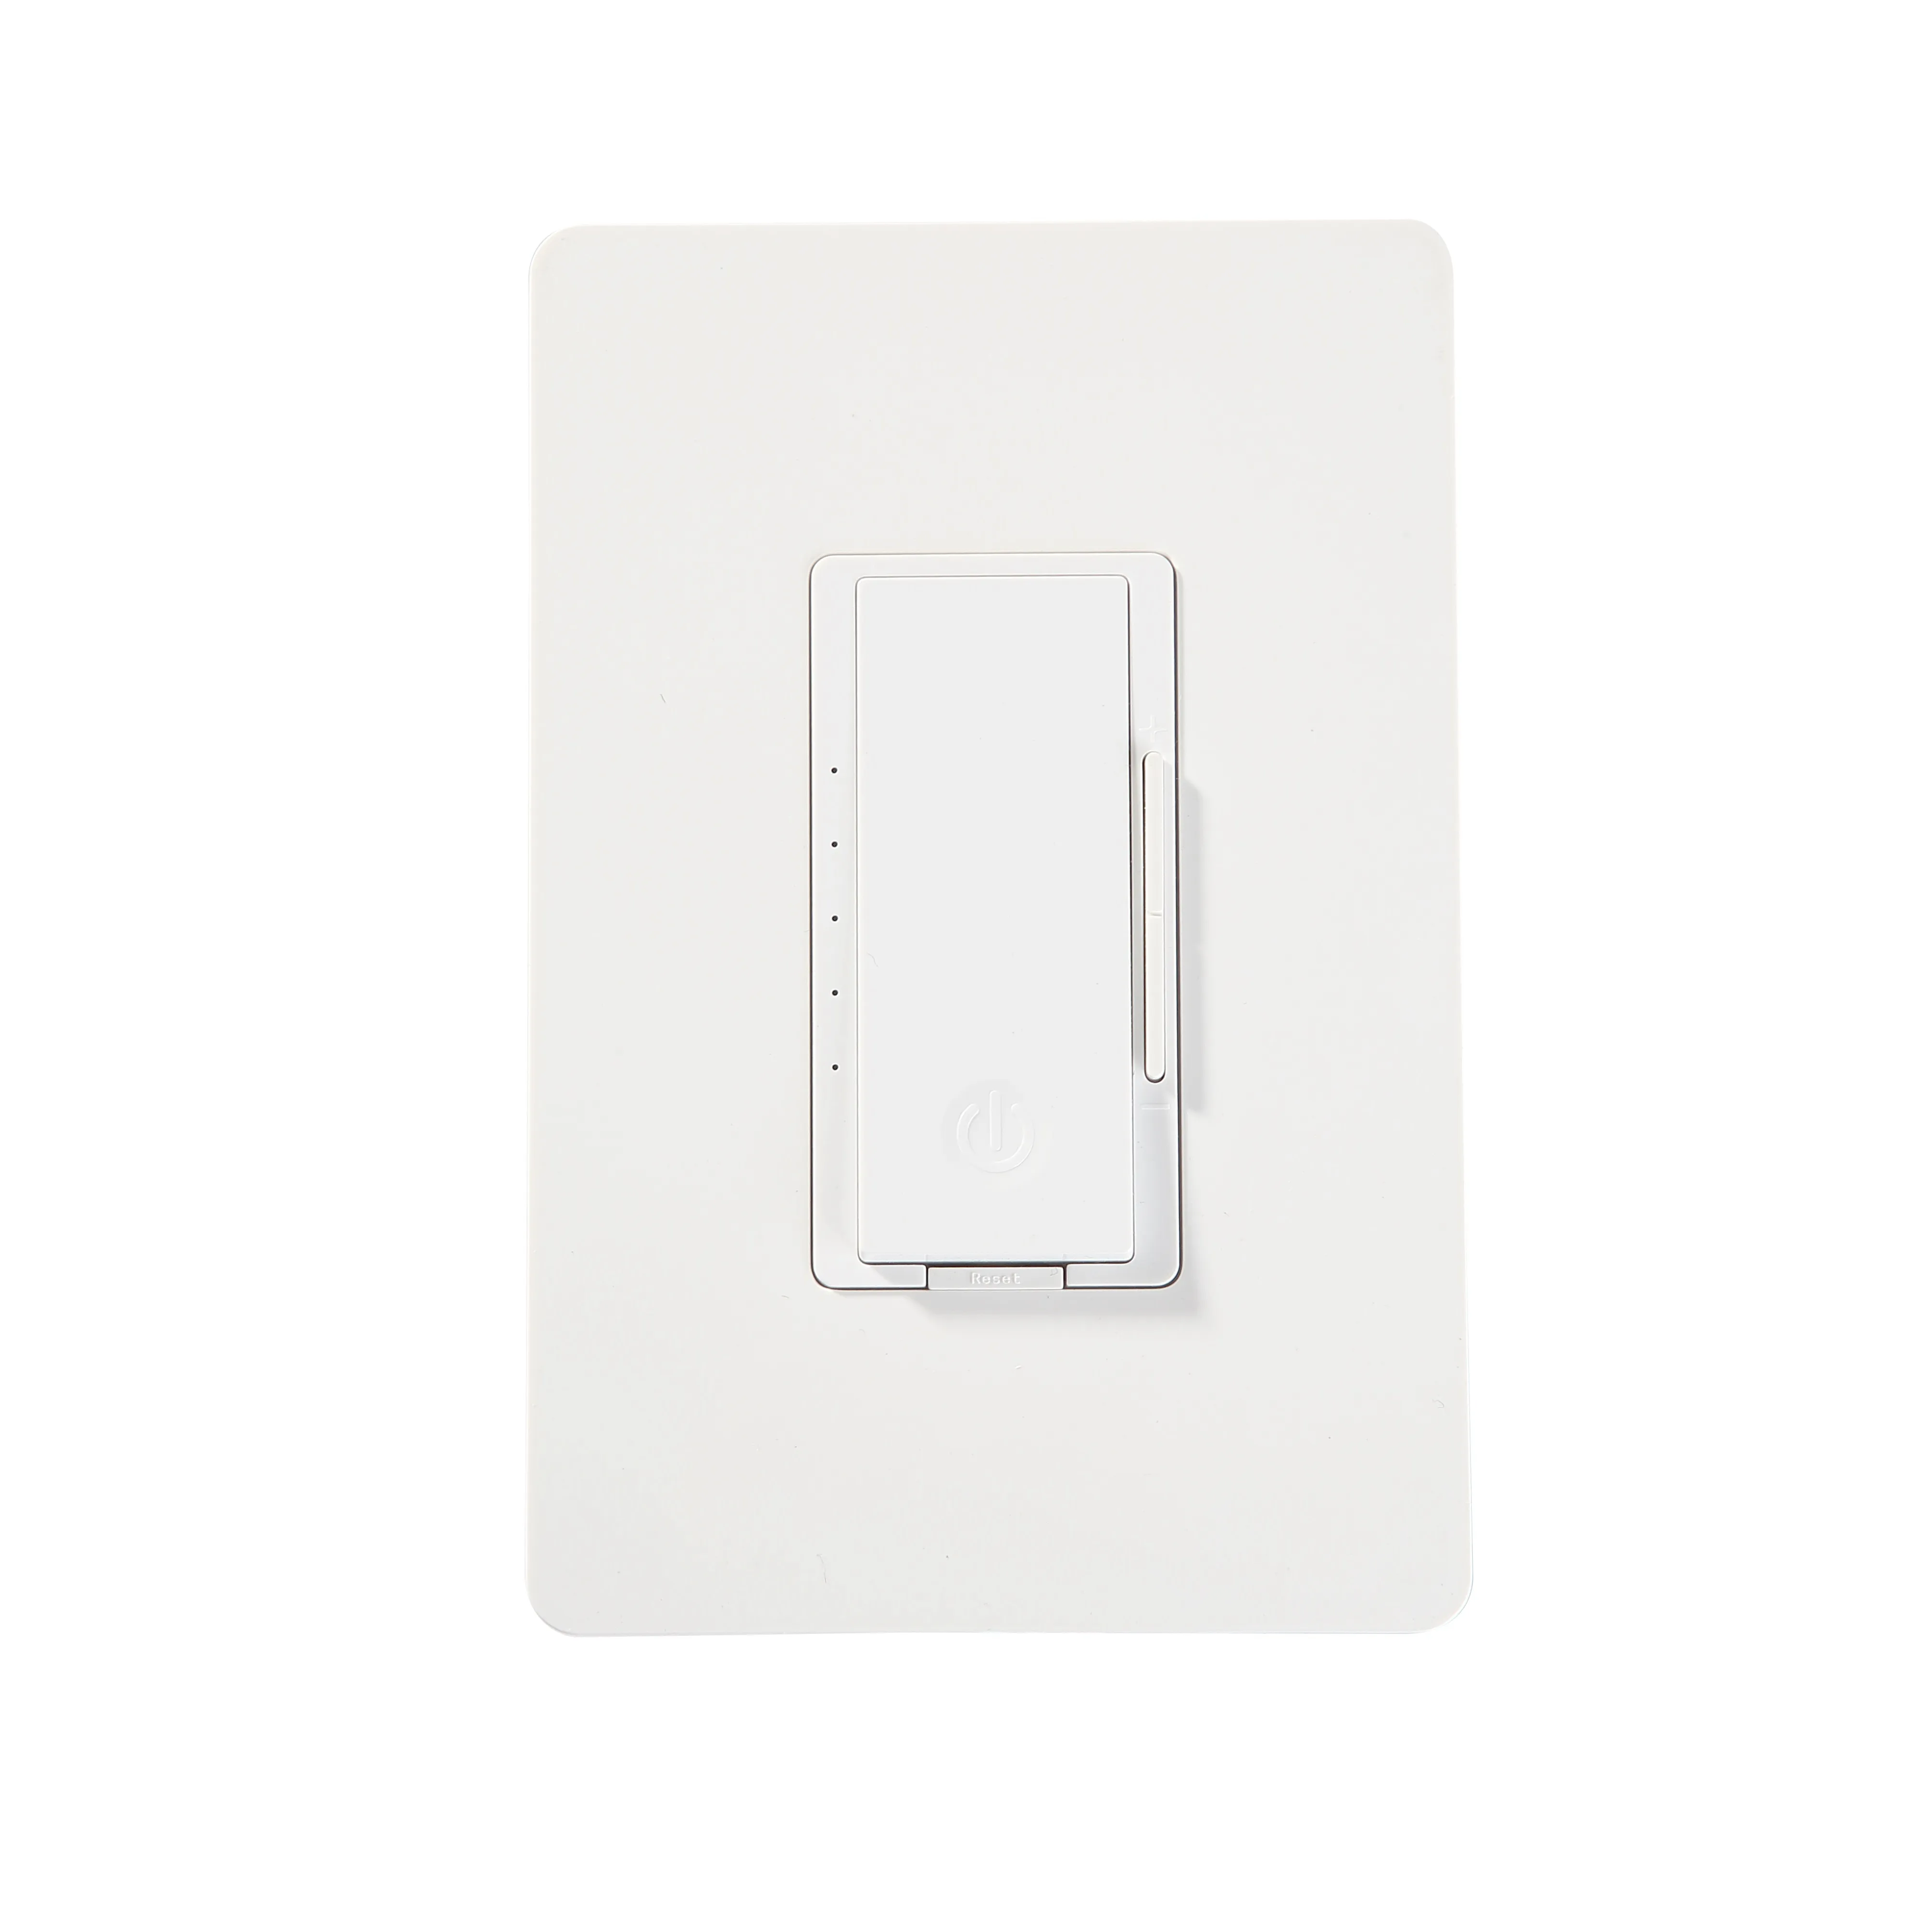 Manufacturer Supplier China Cheap Wifi Smart Light Dimmer Switch By Voice Control With Alexa Wifi